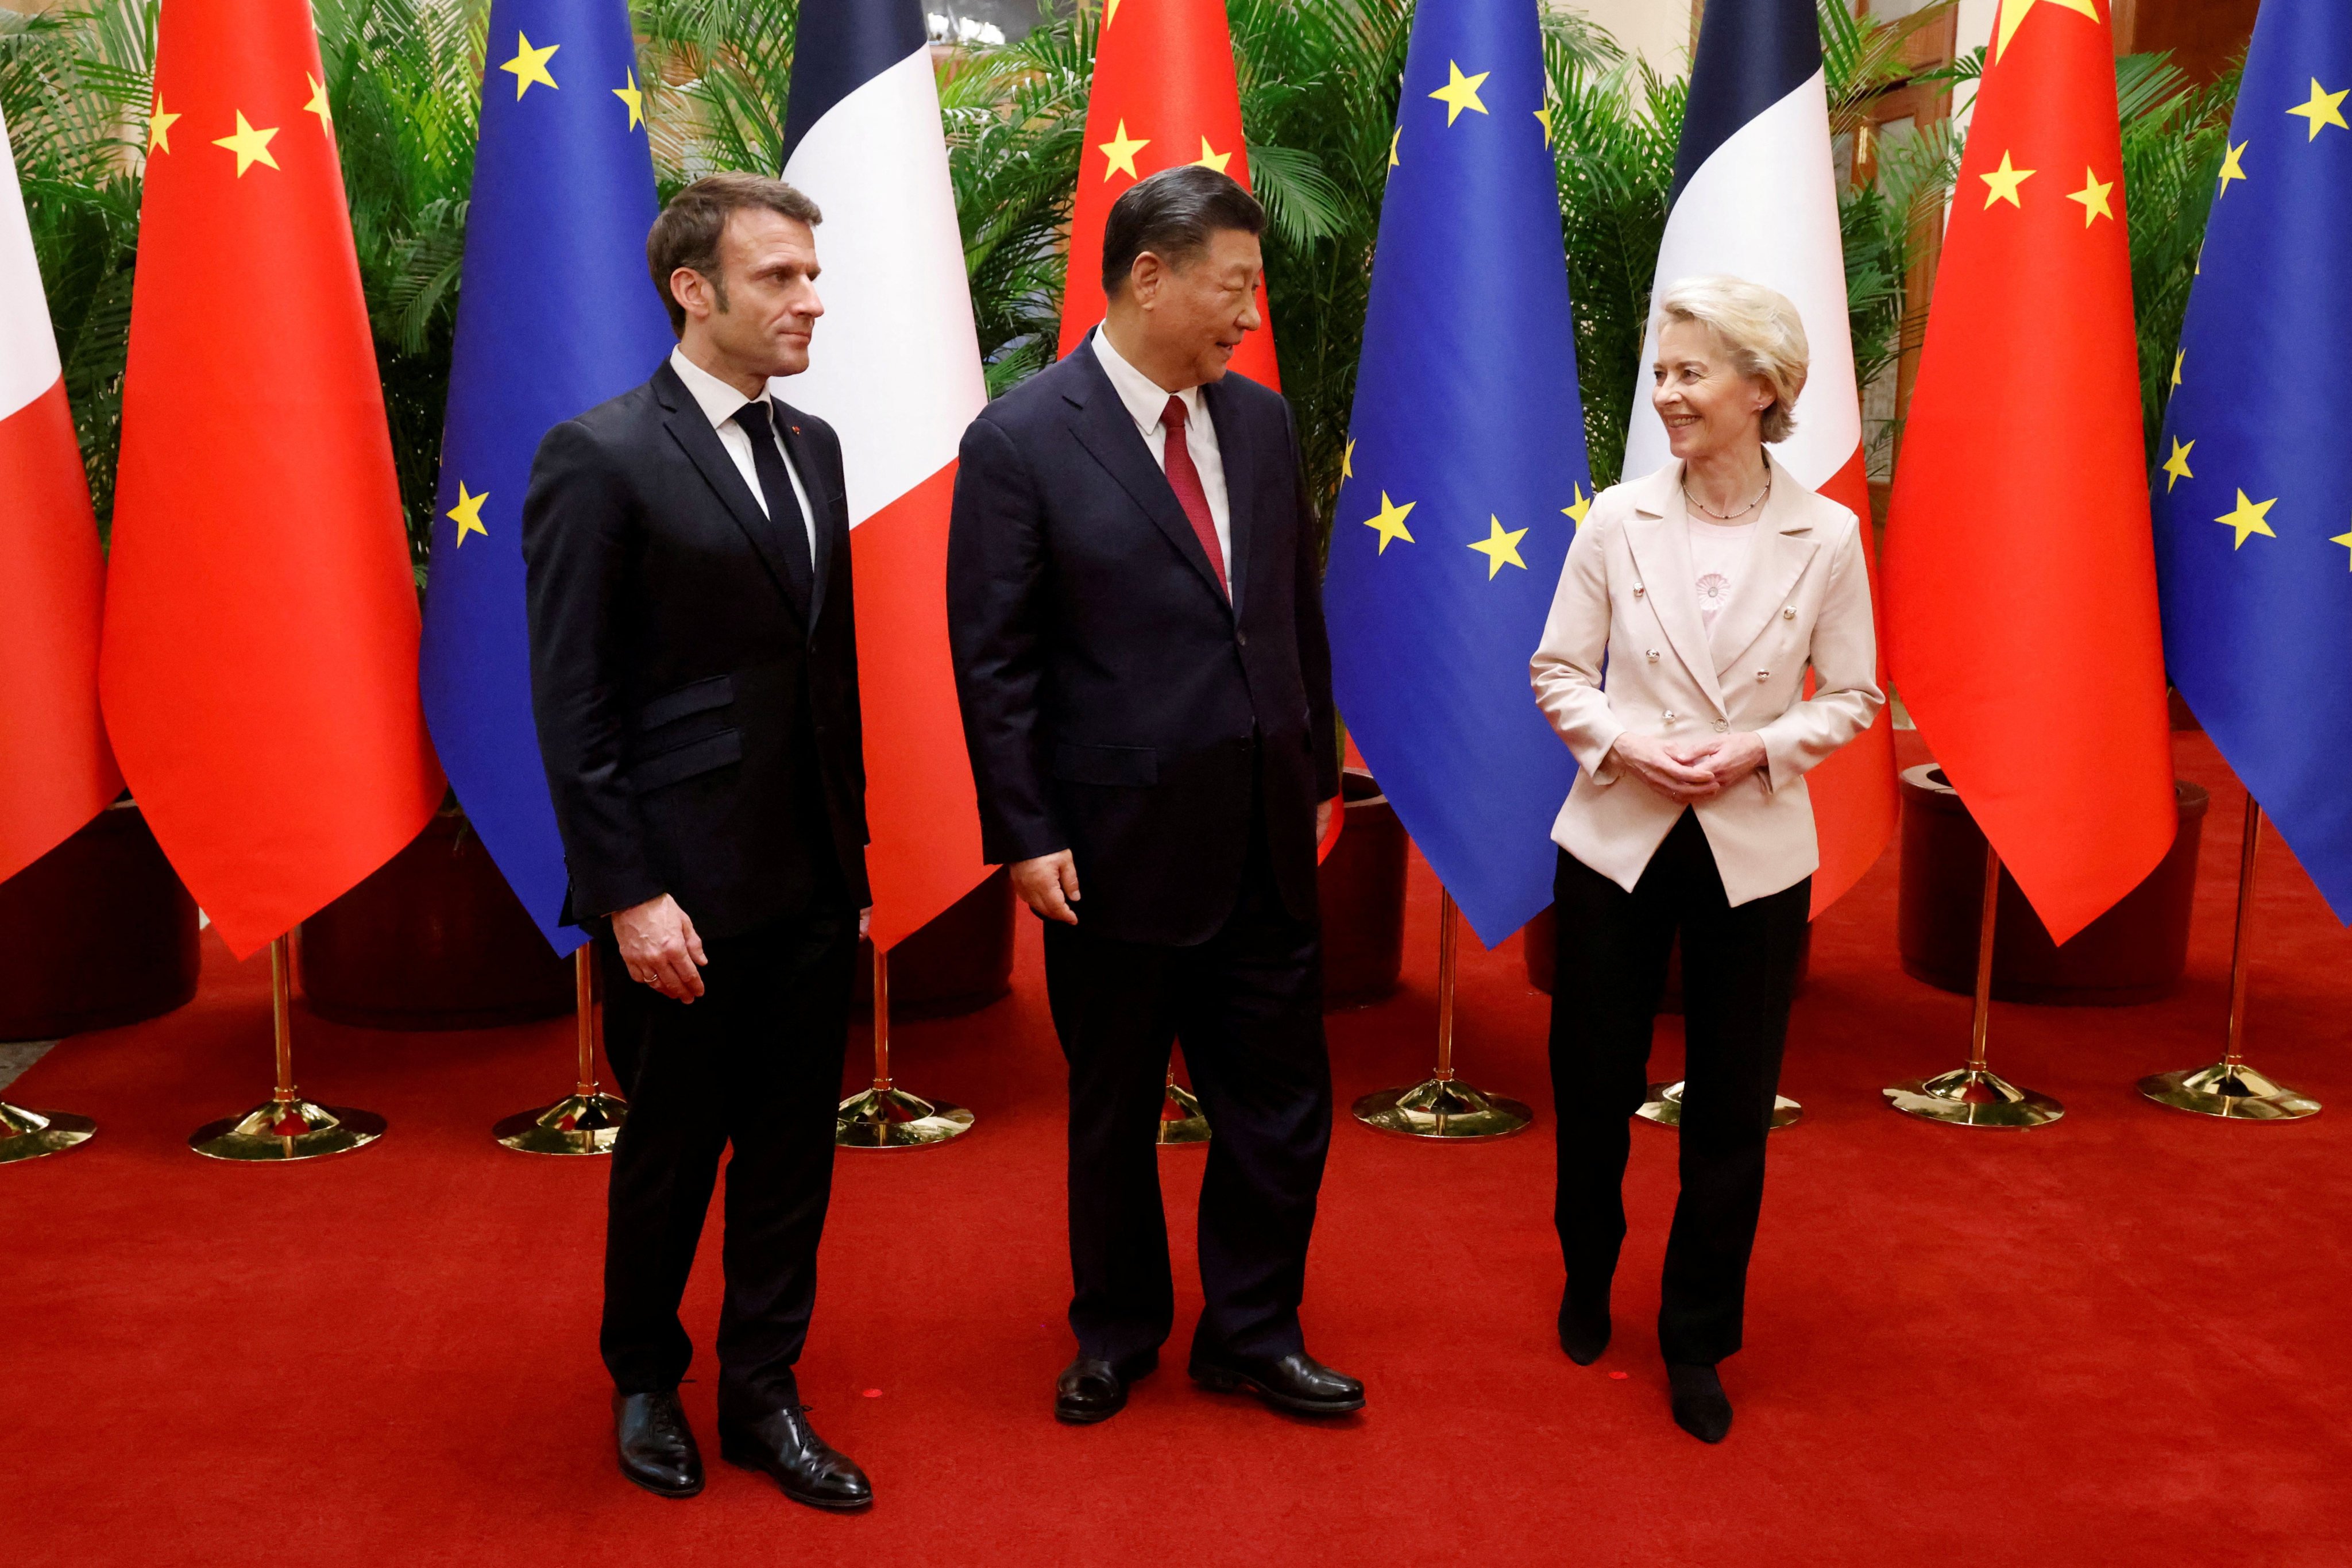 Chinese President Xi Jinping, his French counterpart Emmanuel Macron and European Commission President Ursula von de Leyen  in Beijing last April. The three are due to meet again in Paris next week. Photo: Pool via Reuters